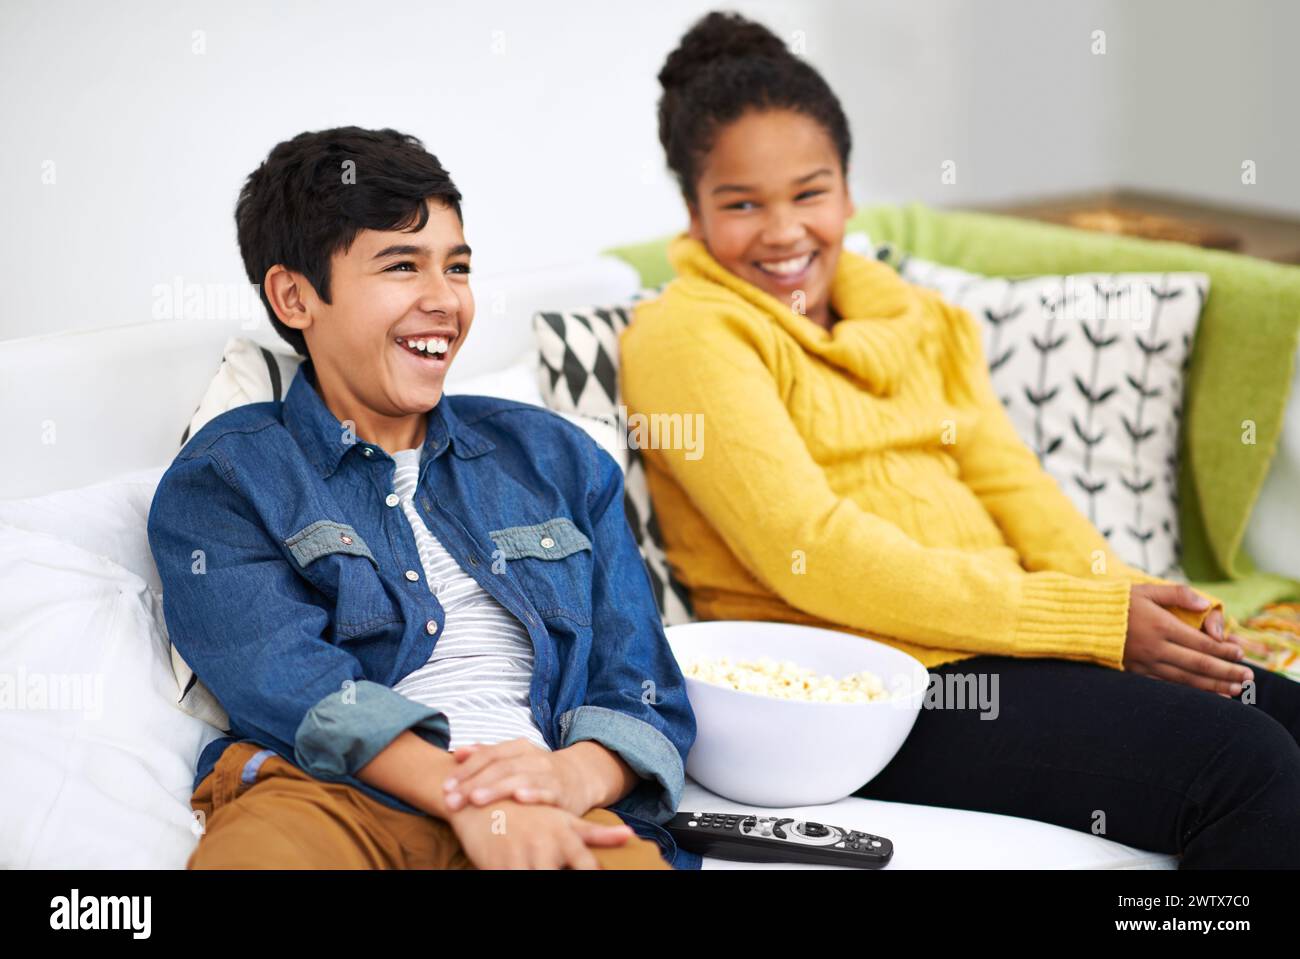 Happy family, siblings or popcorn for watching television, couch or laughing for funny joke on comedy show. Boy, girl or teenagers on sofa with cable Stock Photo